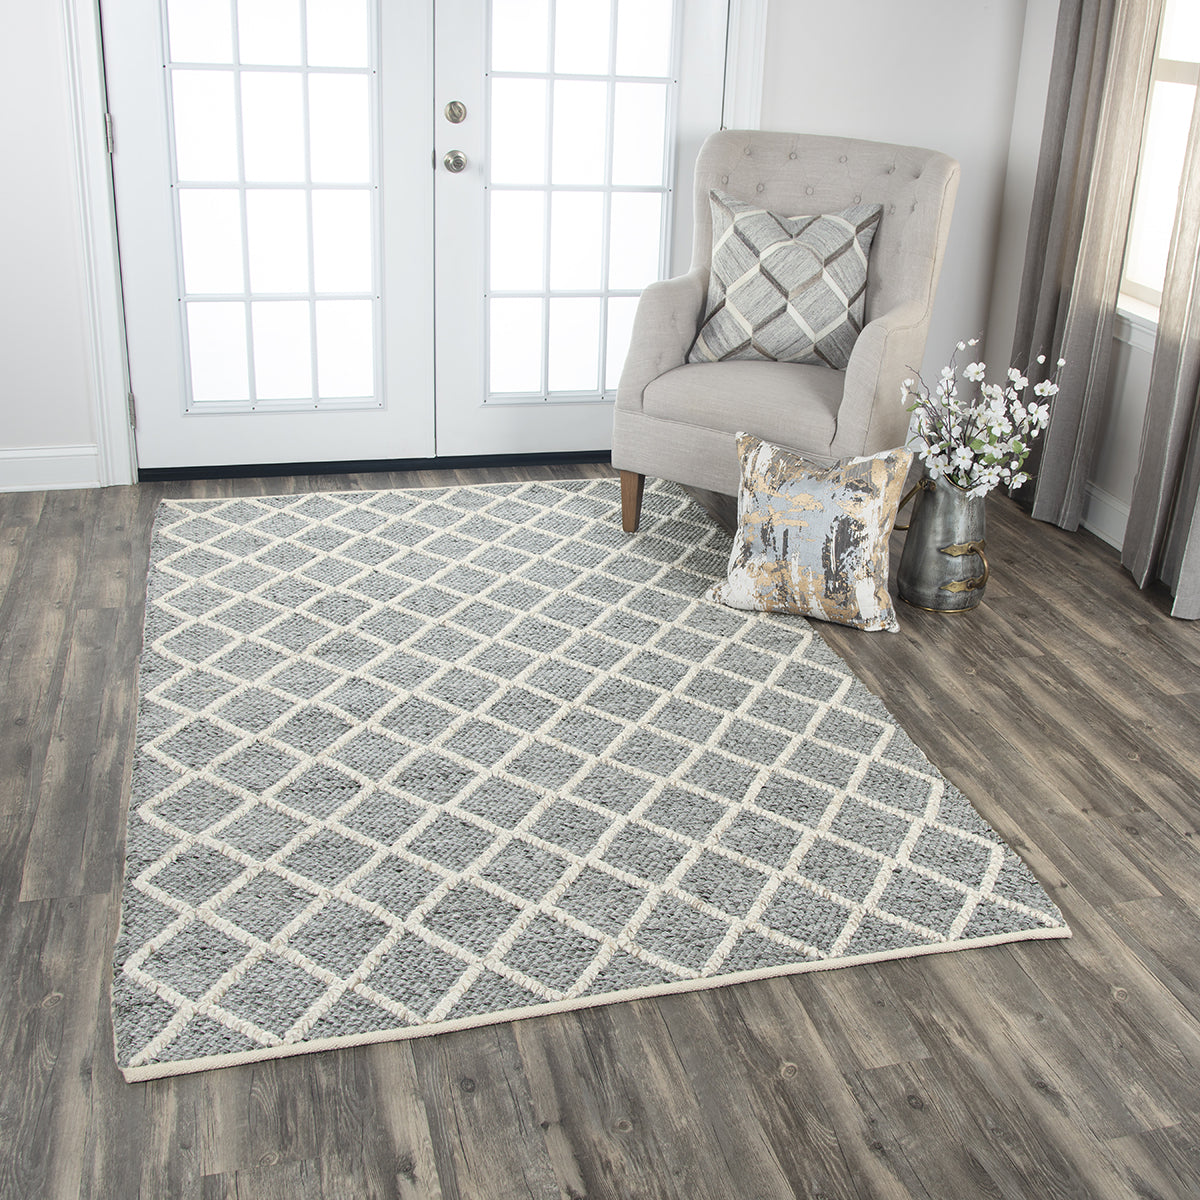 Rizzy Ewe Complete me EWE106 Gray Area Rug by Donny Osmond Home main image